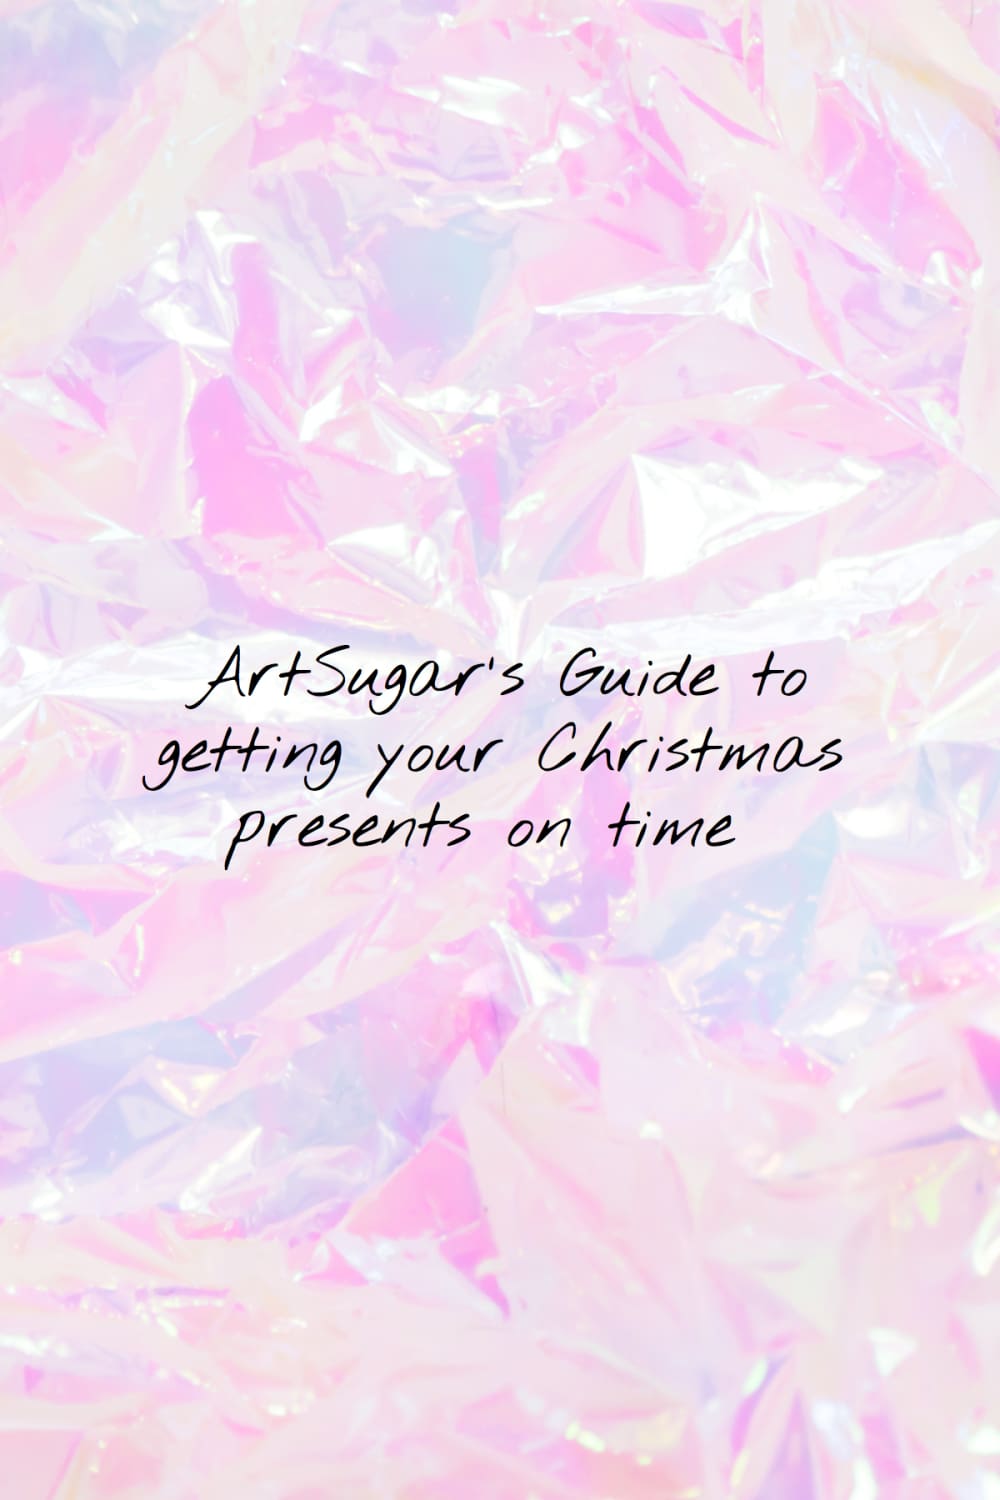 ArtSugar's Guide to getting your Christmas presents on time!